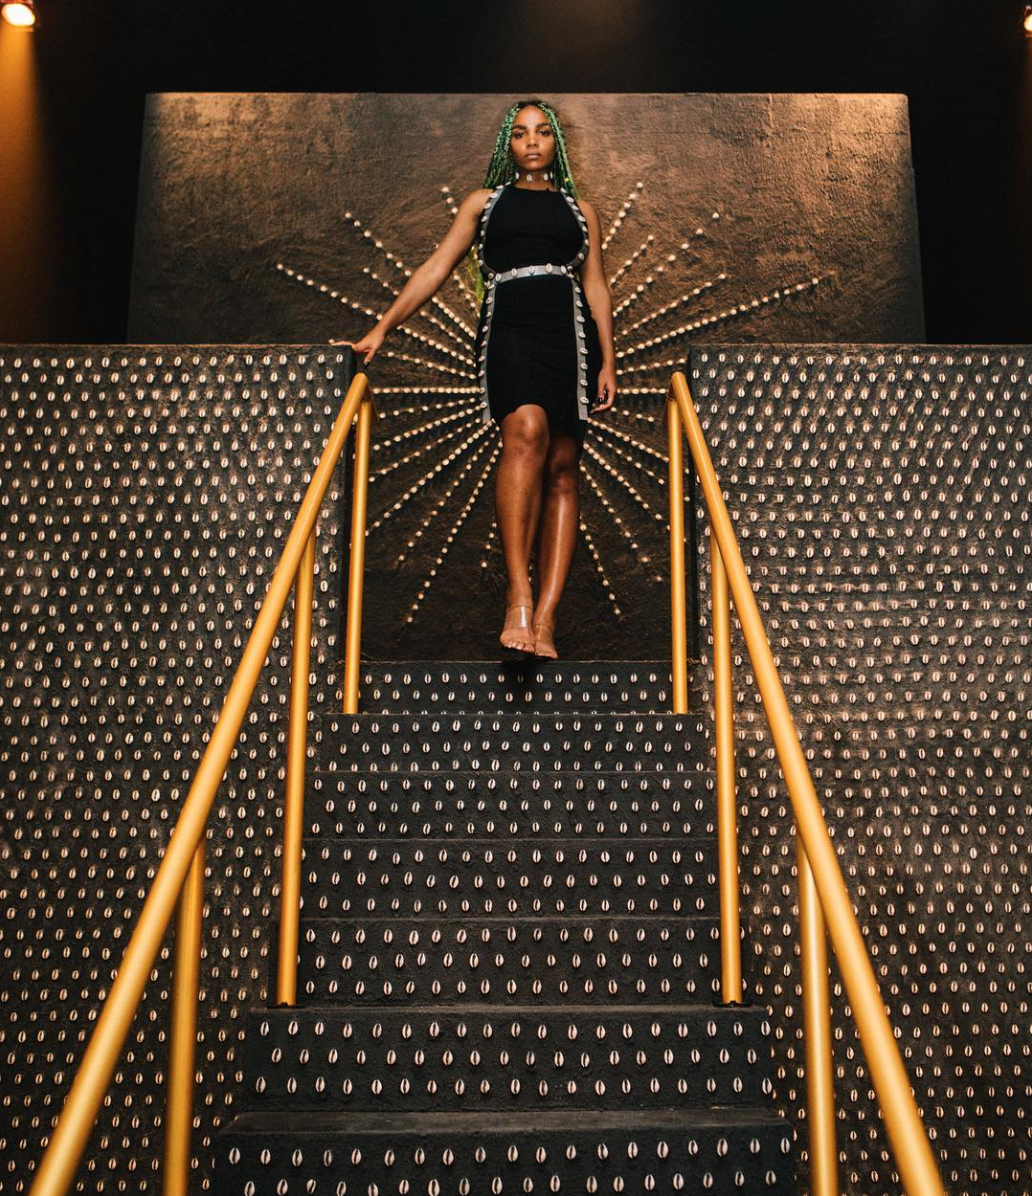 Image: Shani Crowe standing at the top of the stairs of her recent installation, Rest in Peace, at a Refinery29 event in Chicago. Behind her is a starburst made of cowry, adhered to the wall. In the foreground are the stairs and the facade of the structure, which are all patterned with cowry shells as well. The golden stair rails lead down and toward the camera. Photo from Shani Crowe's Instagram.